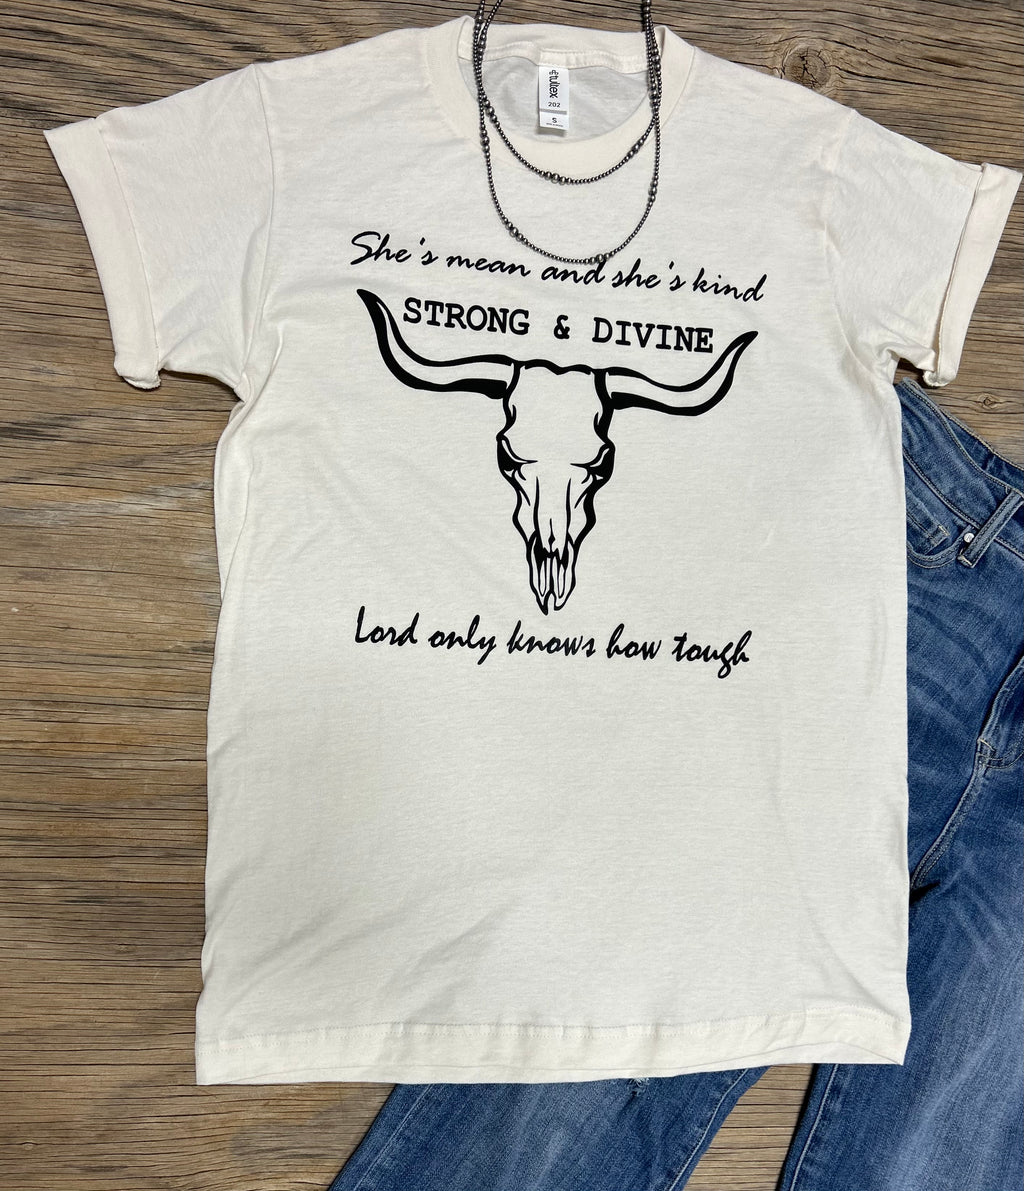 The Lord only knows how tough TEE